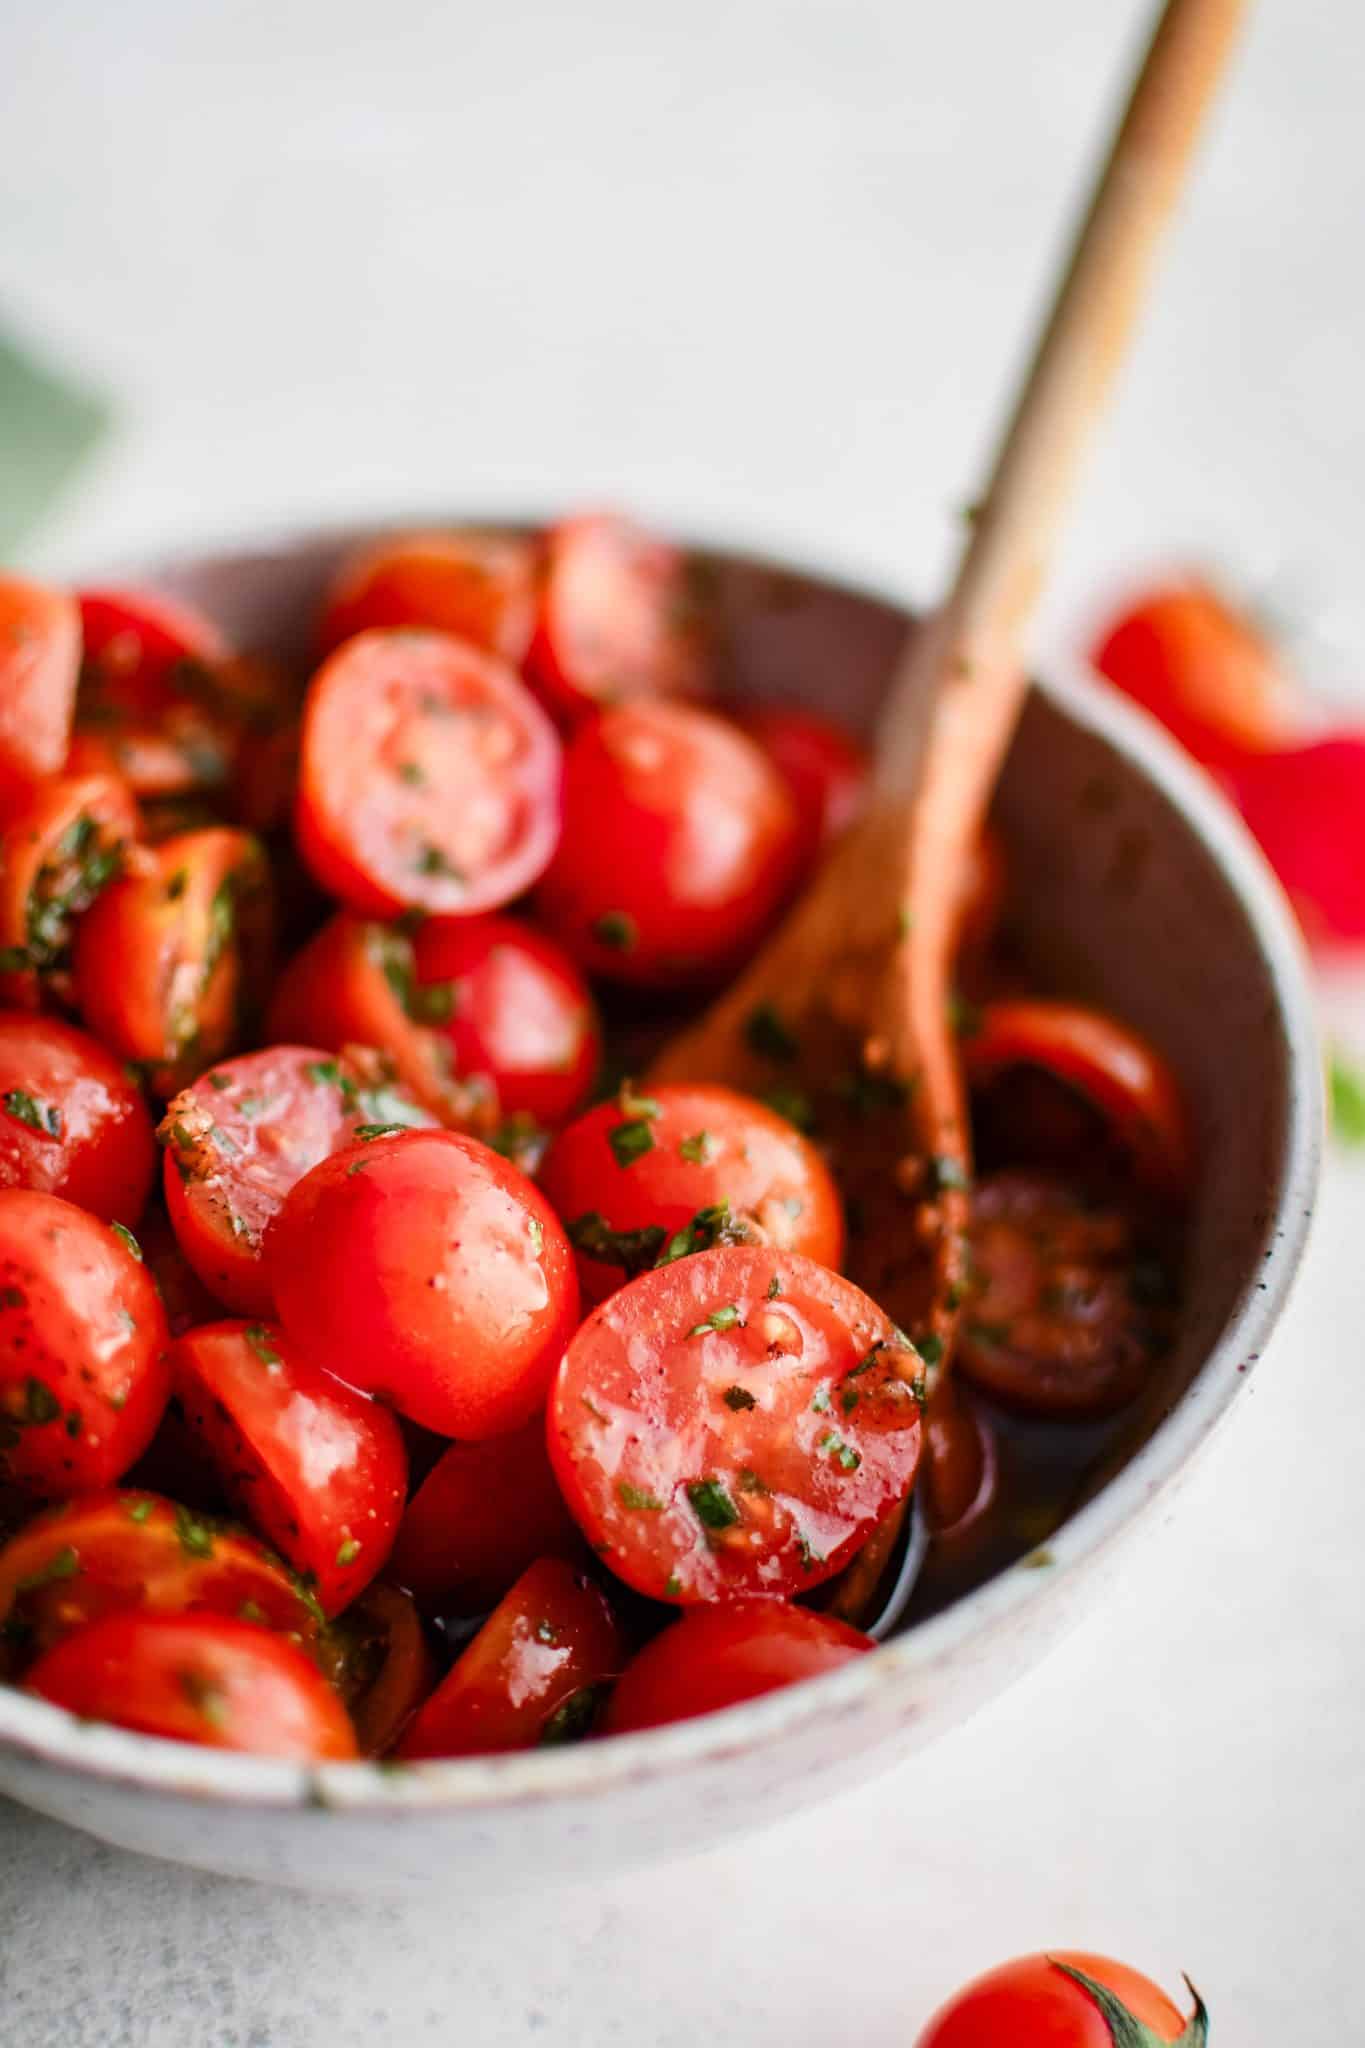 Large white salad bowl filled with halved cherry tomatoes tossed in olive oil, balsamic vinaigrette, garlic, salt, black pepper, and fresh herbs.